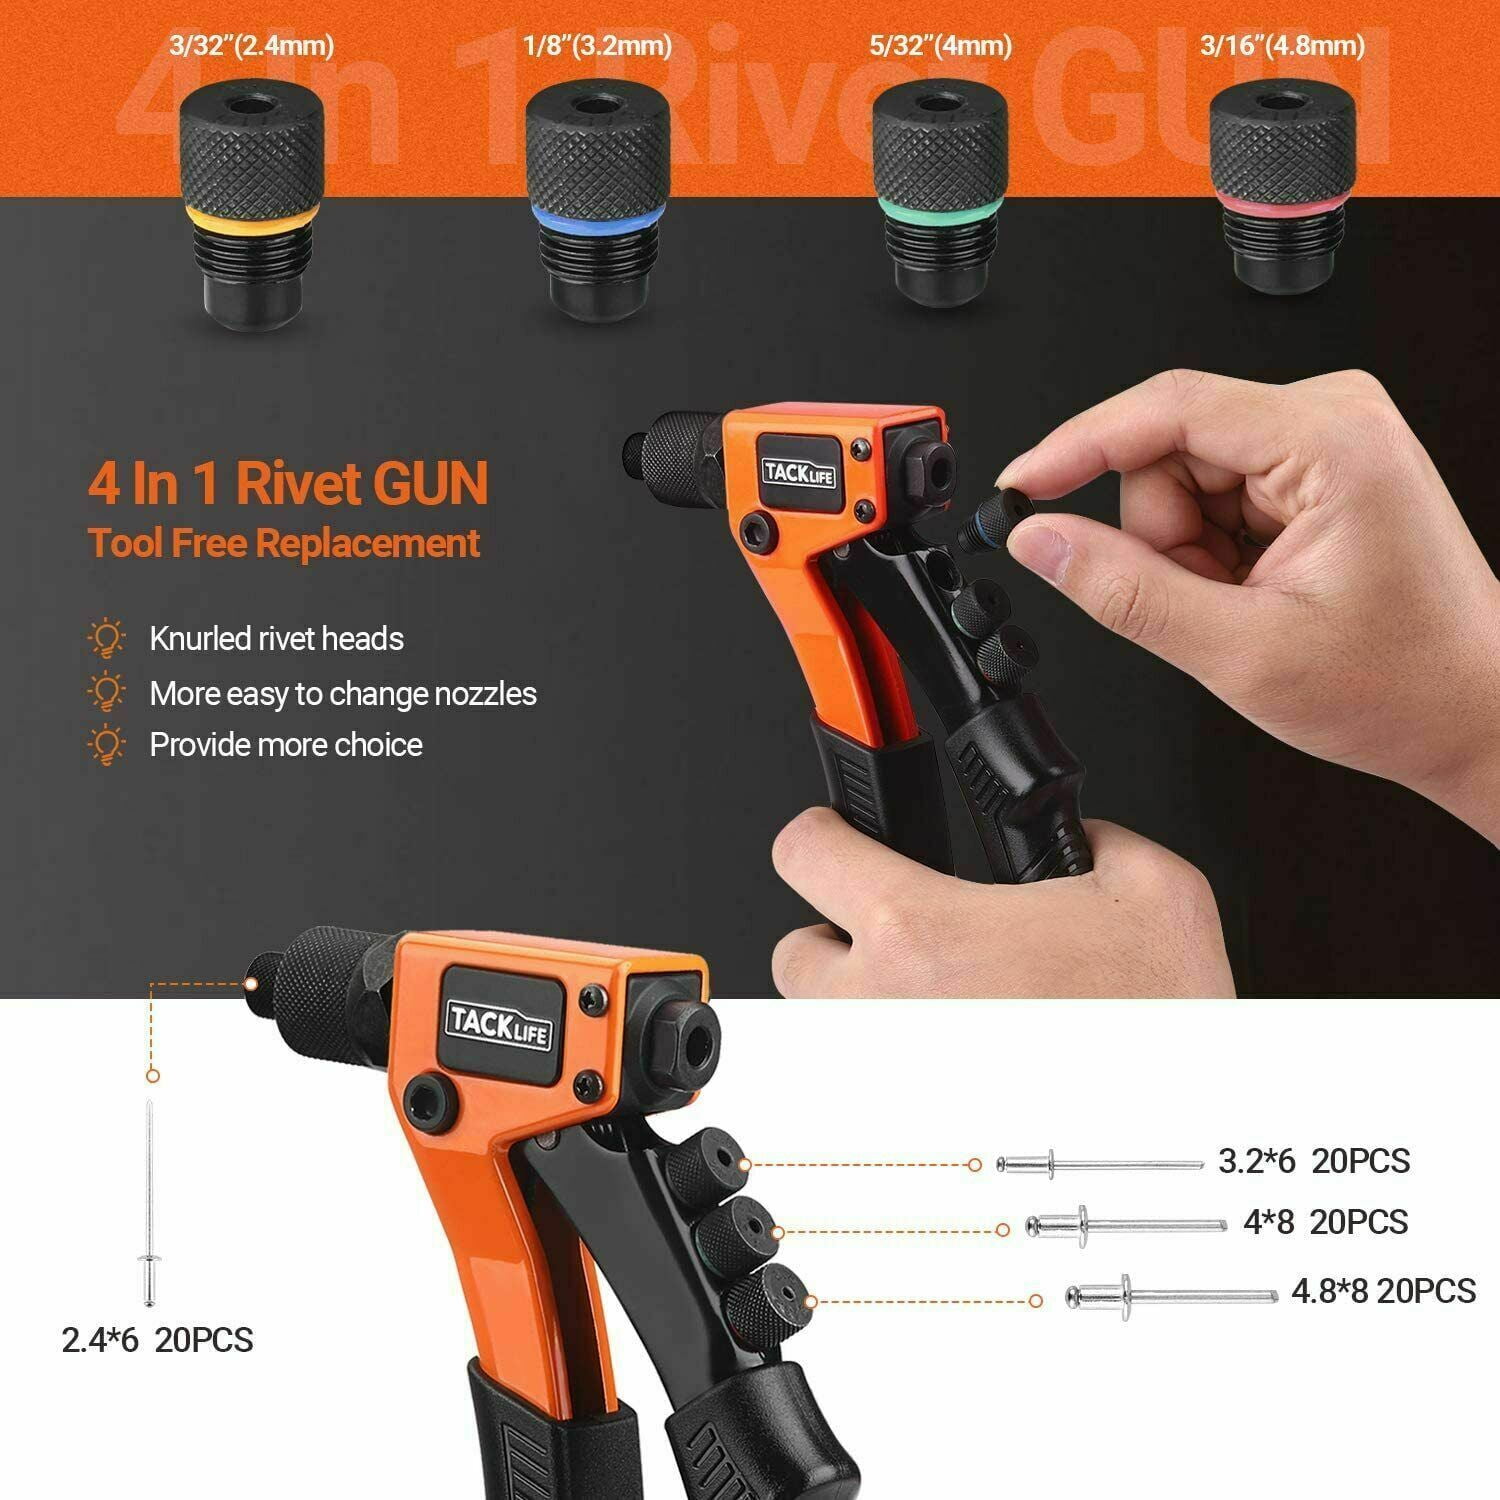 DuraTech 4-in-1 Rivet Gun Pop Rivet Tool Kit with 100 Rivets - 3/32' 1/8' 5/32' 3/16' Heavy Duty Hand Riveter with 4 Interchangeable Nosepieces for Me